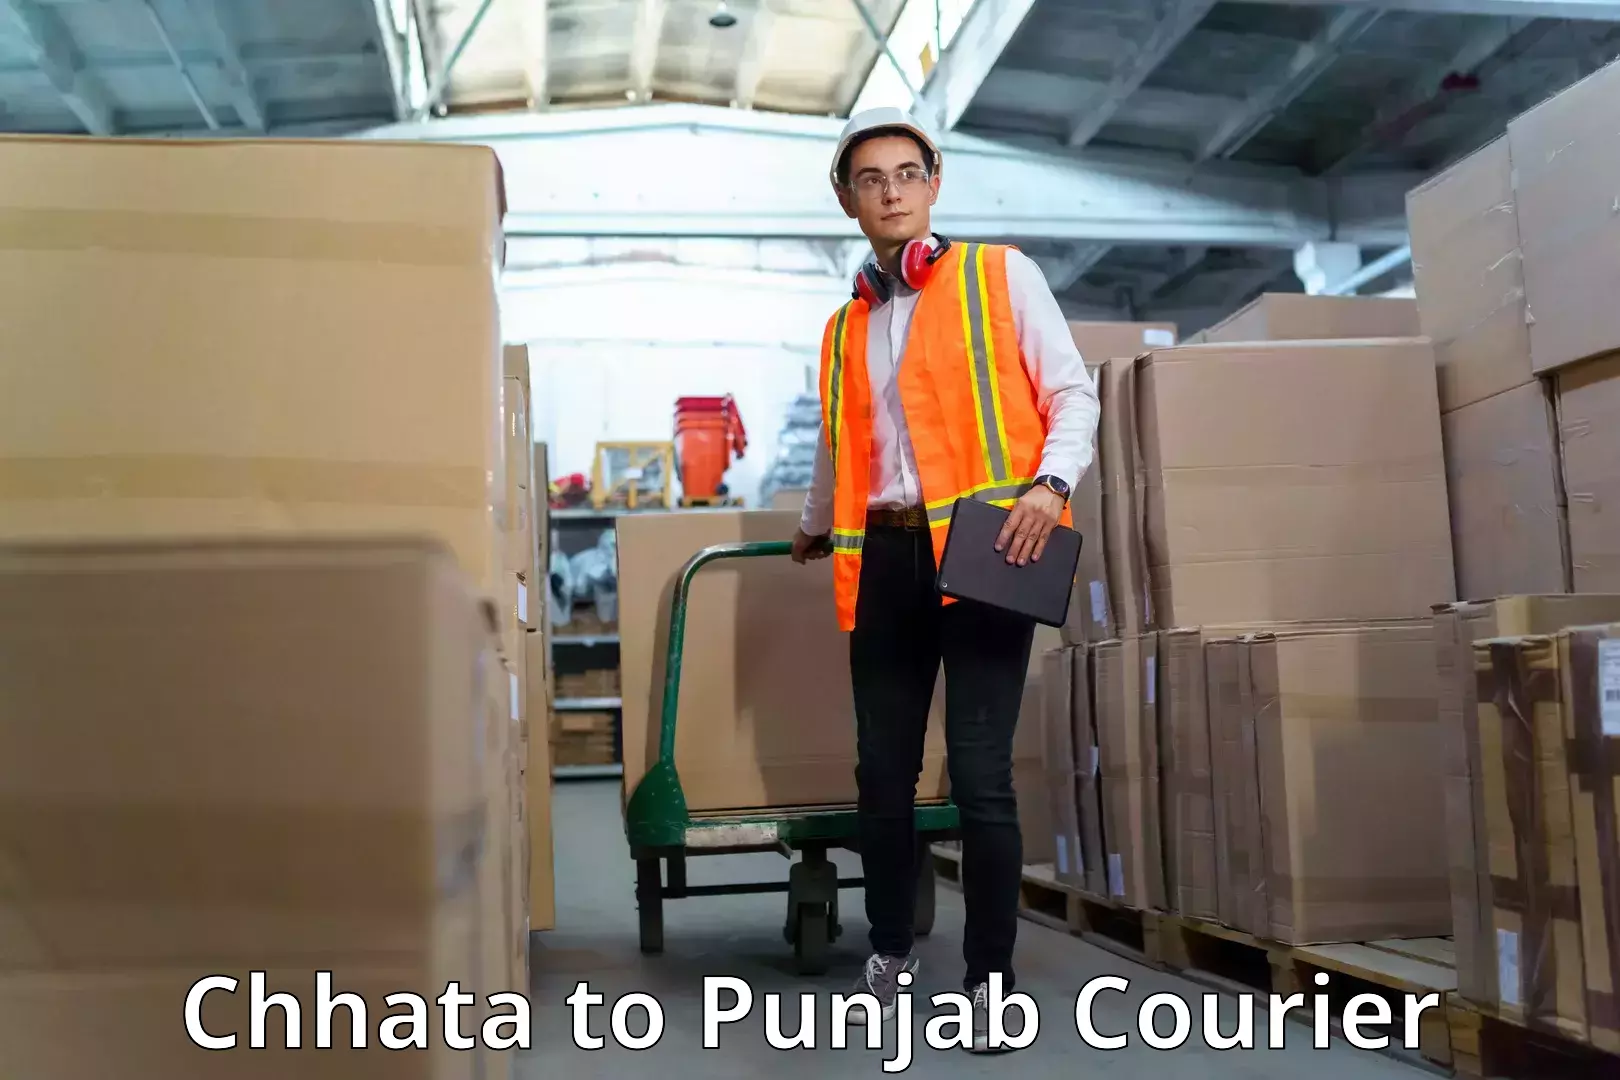 Global courier networks Chhata to Punjab